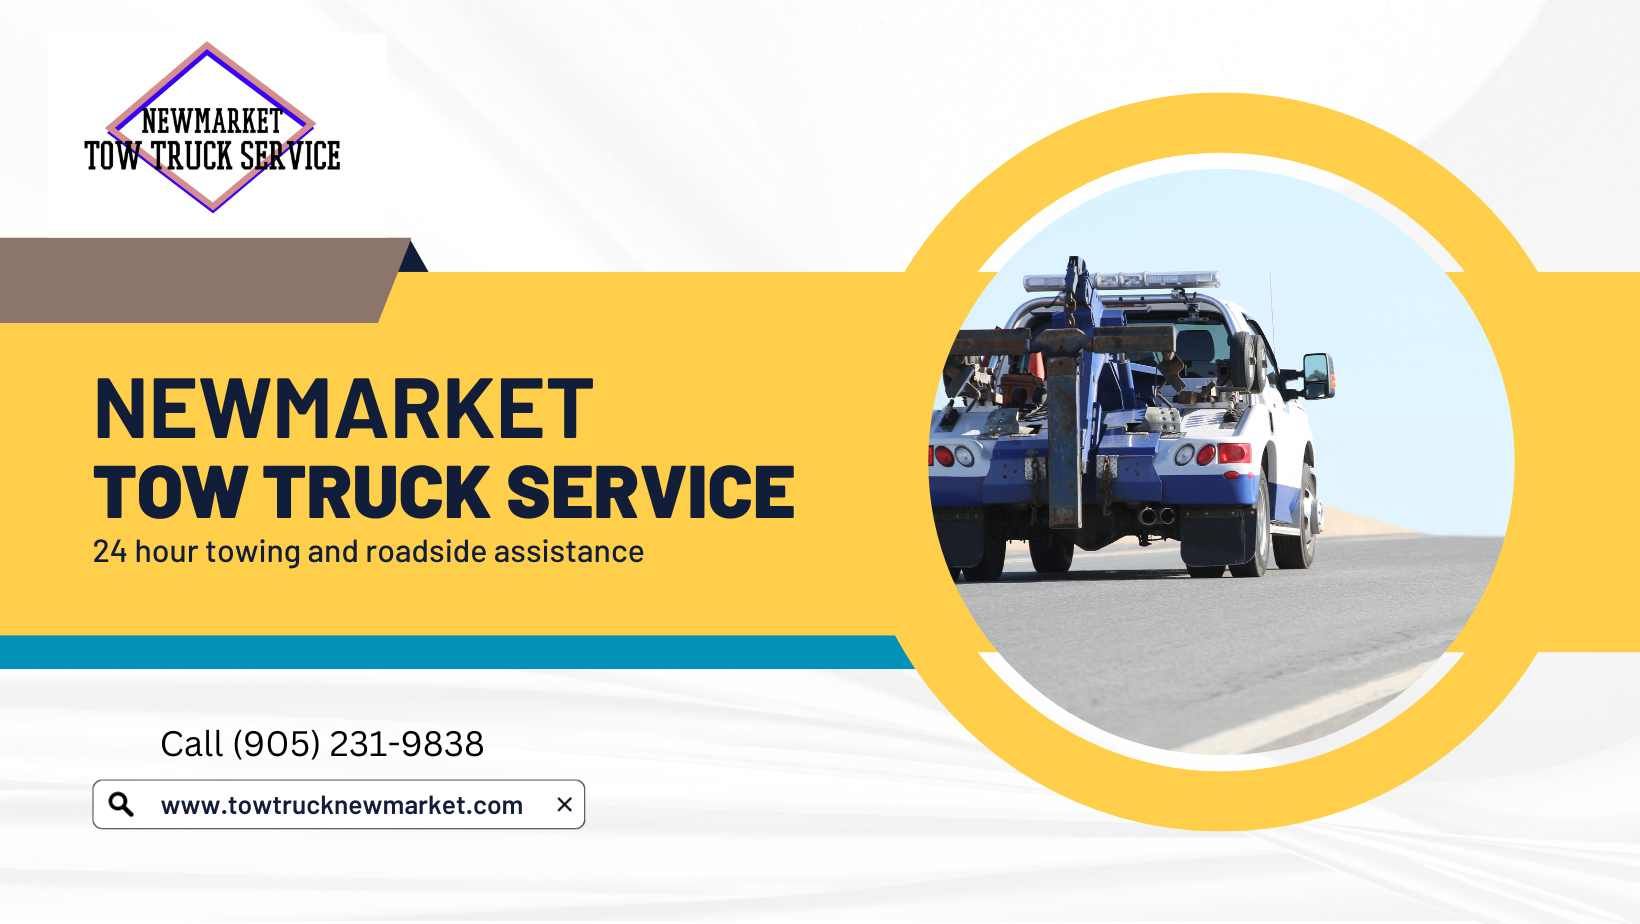 official Newmarket Tow Truck Service ad banner 1 - 24 hour towing and roadside assistance call 905 231 9838 for towing service in Newmarket